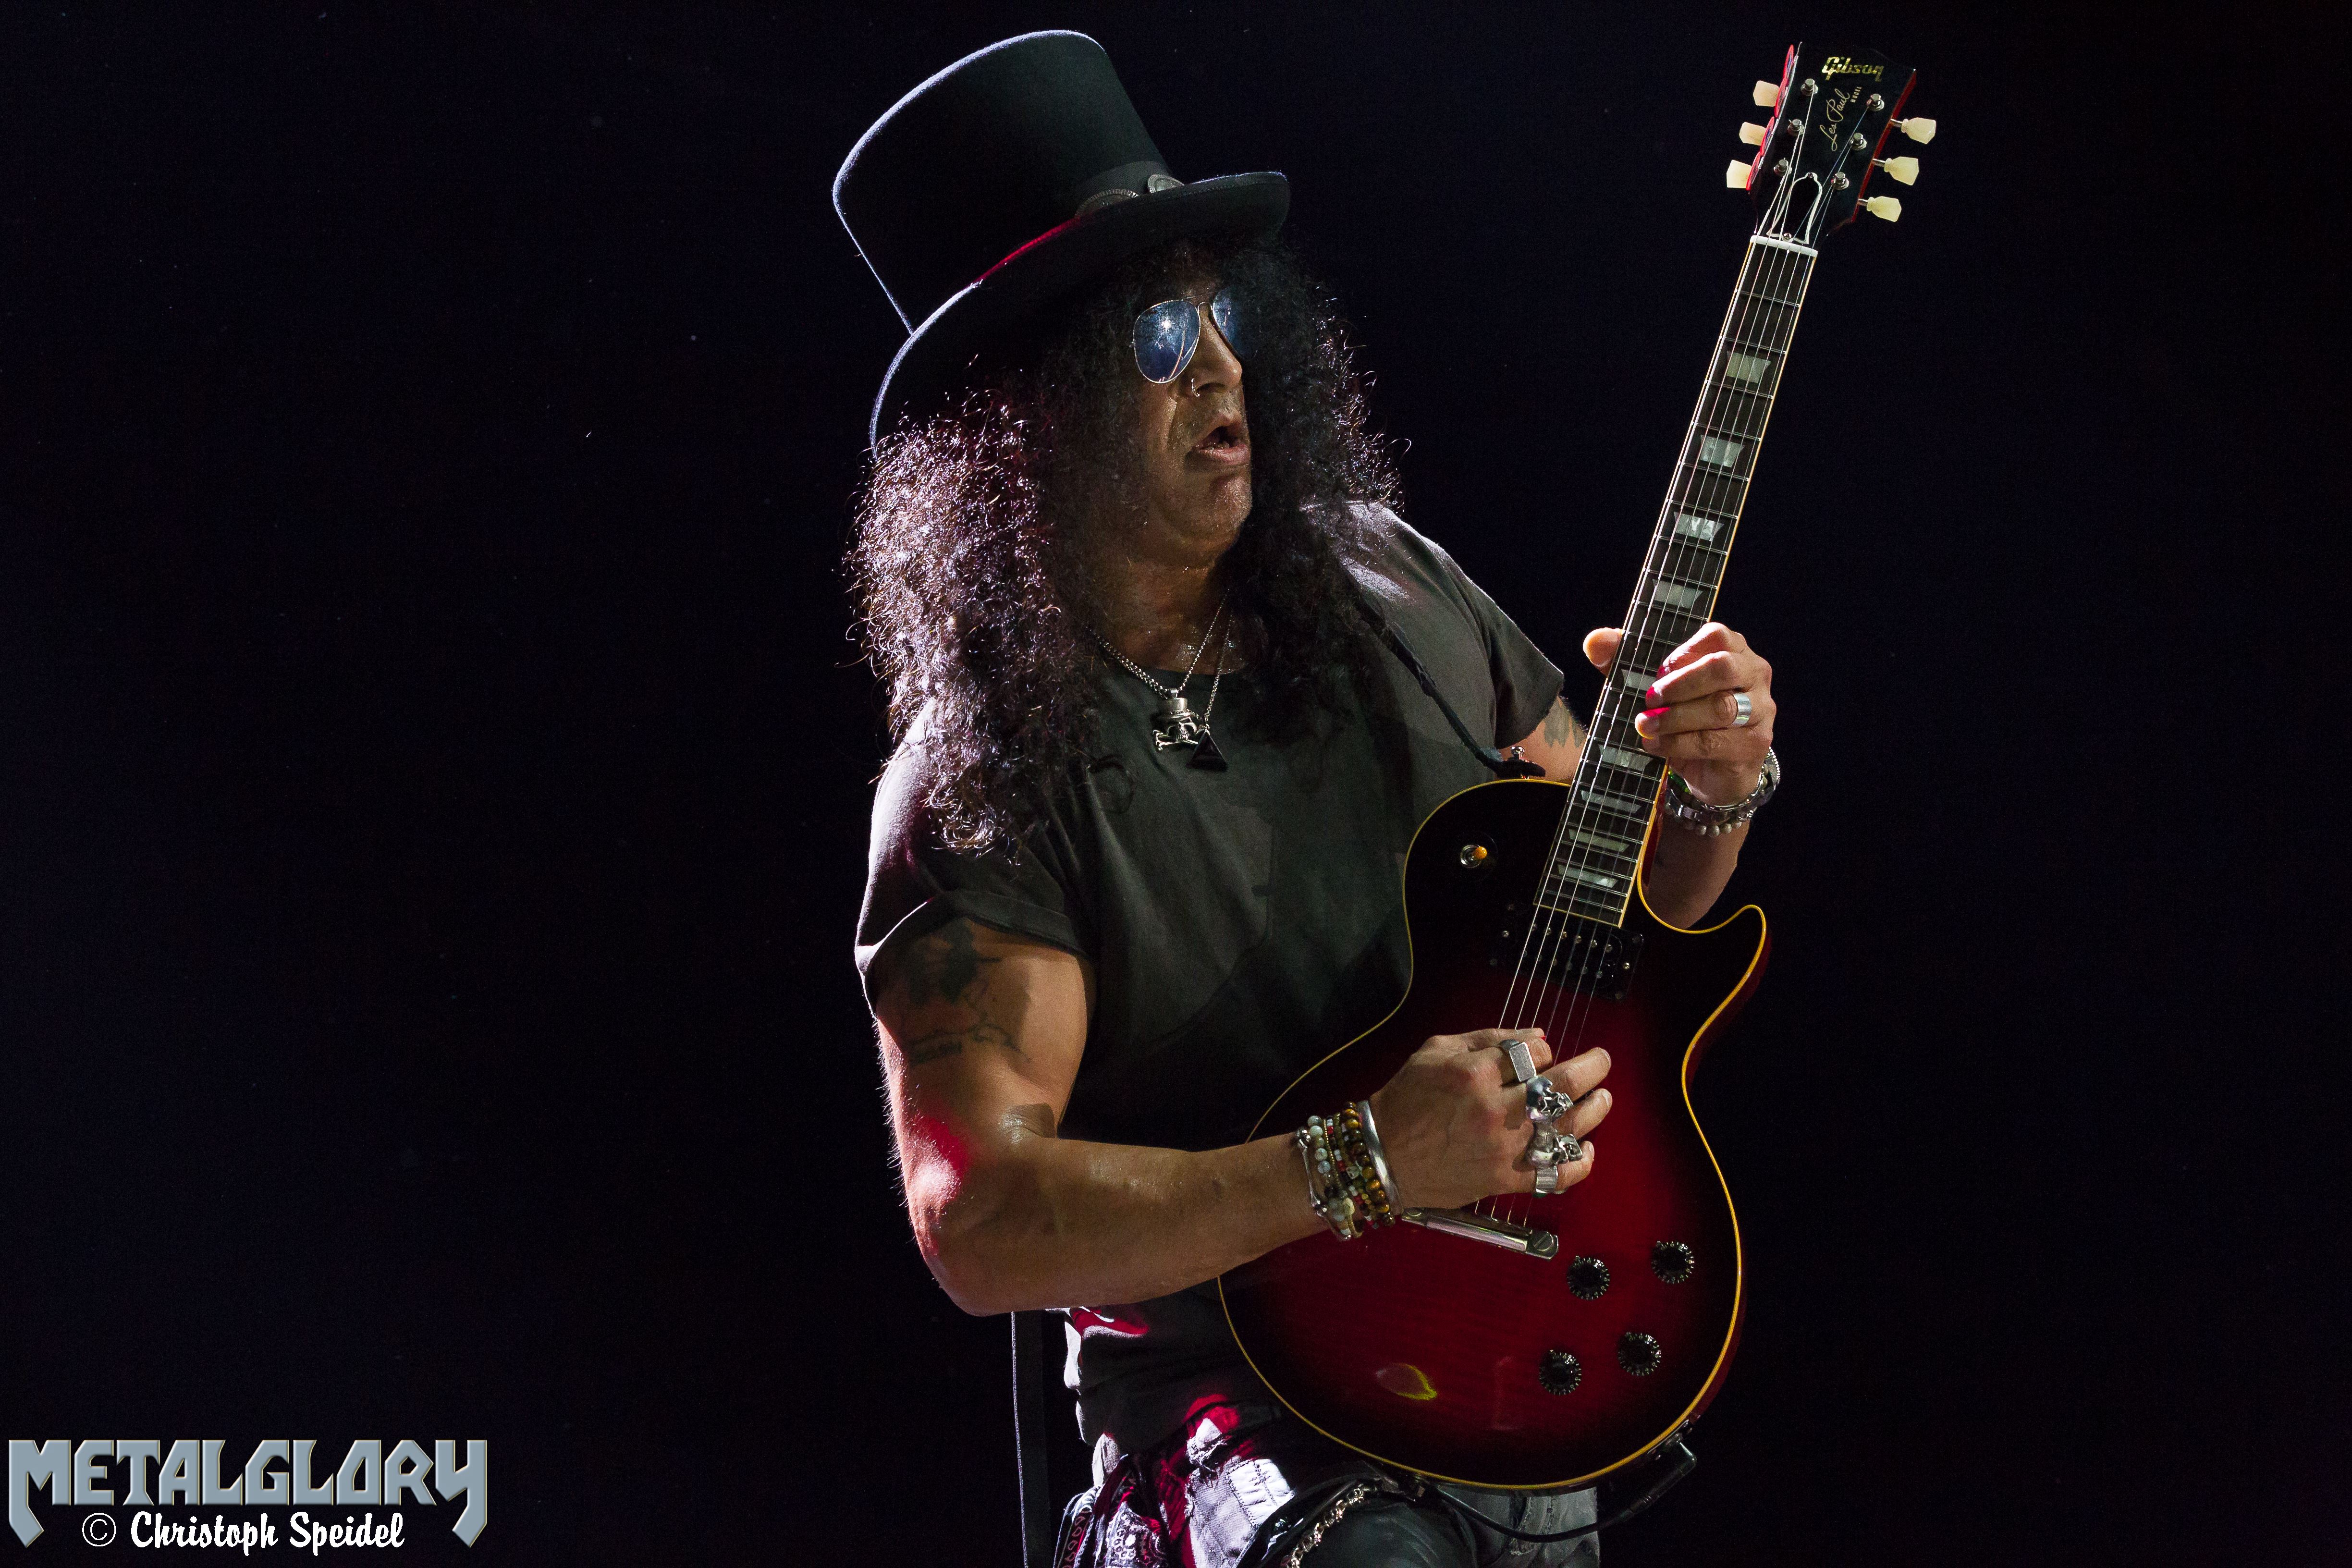 Slash featuring Myles Kennedy and The Conspirators „Living The Dream Tour 2019“, Support Altitudes & Attitudes, 03.03.2019, Sporthalle Hamburg